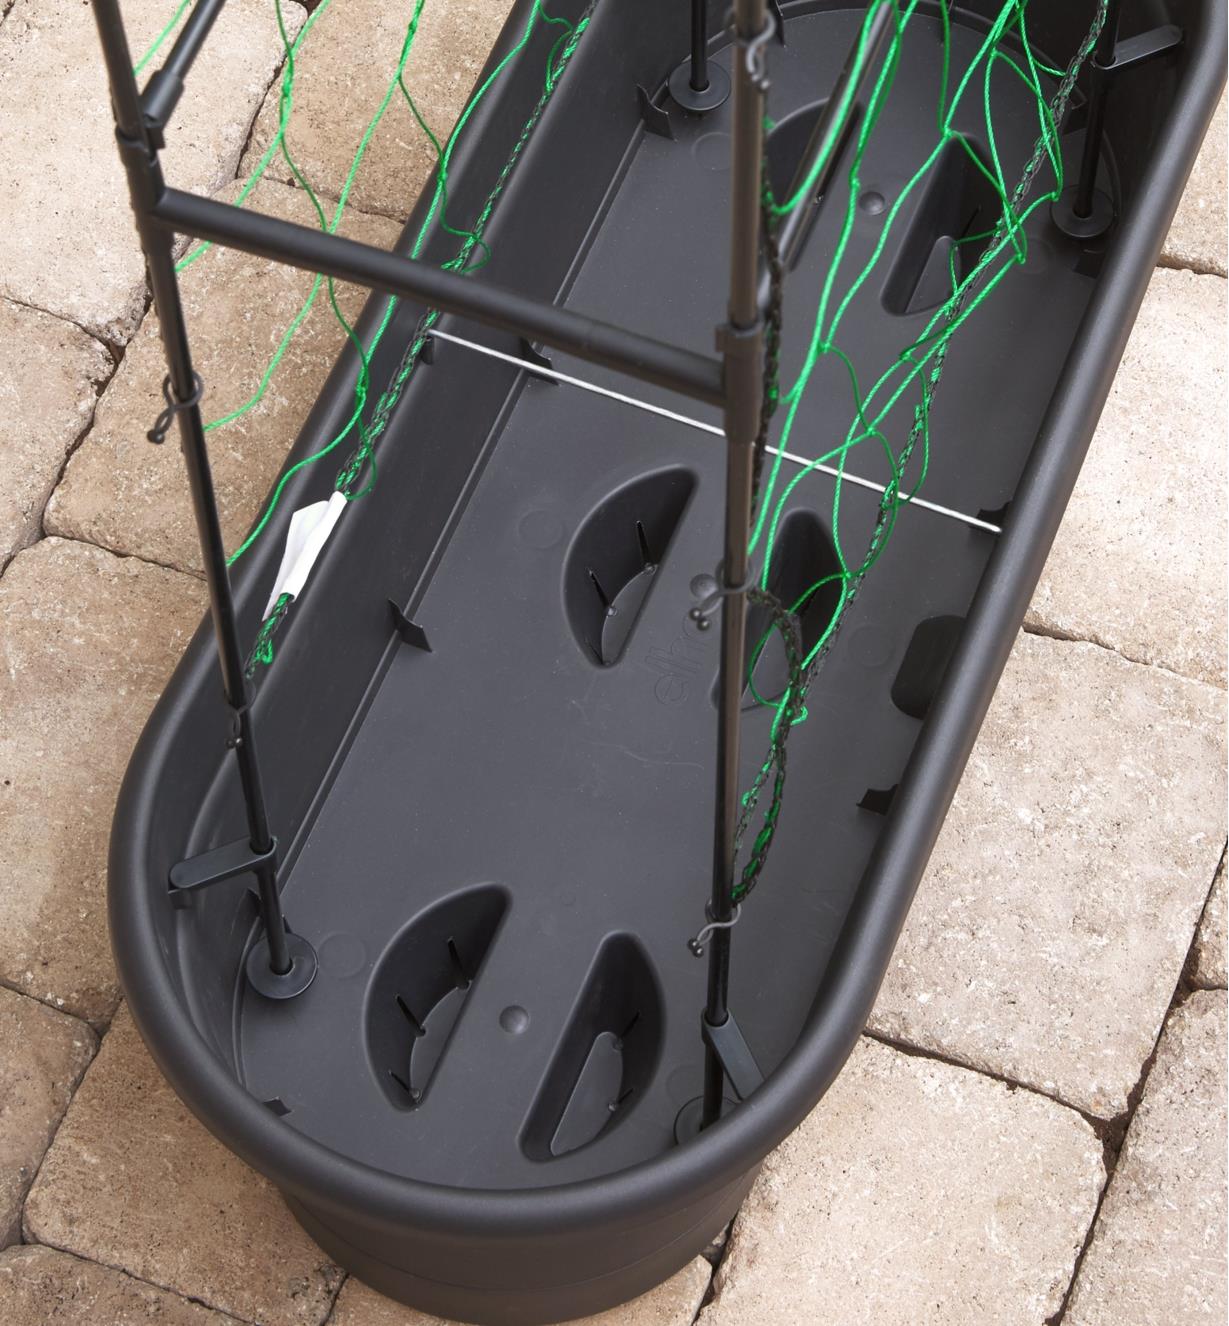 Interior view of the Elho self-watering planter with trellis